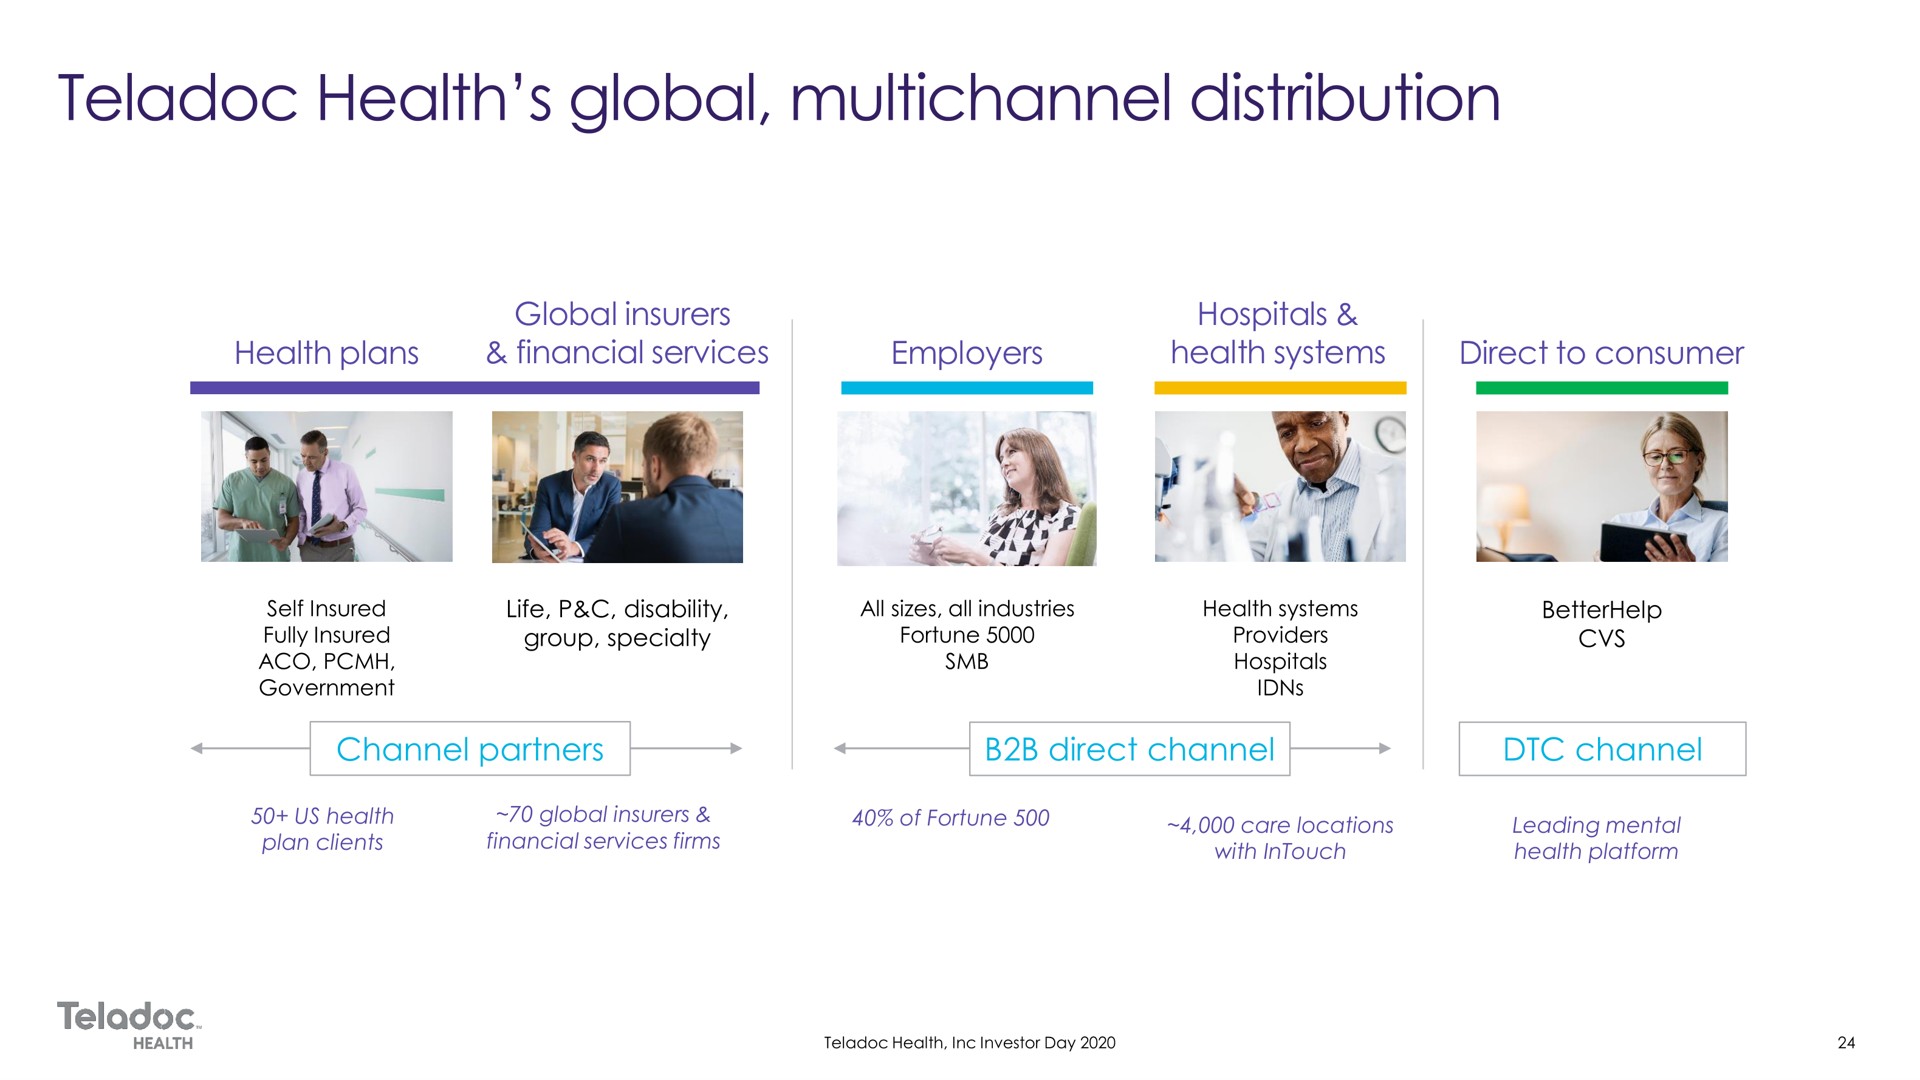 health plans global insurers financial services employers hospitals health systems direct to consumer channel partners direct channel channel distribution | Teladoc